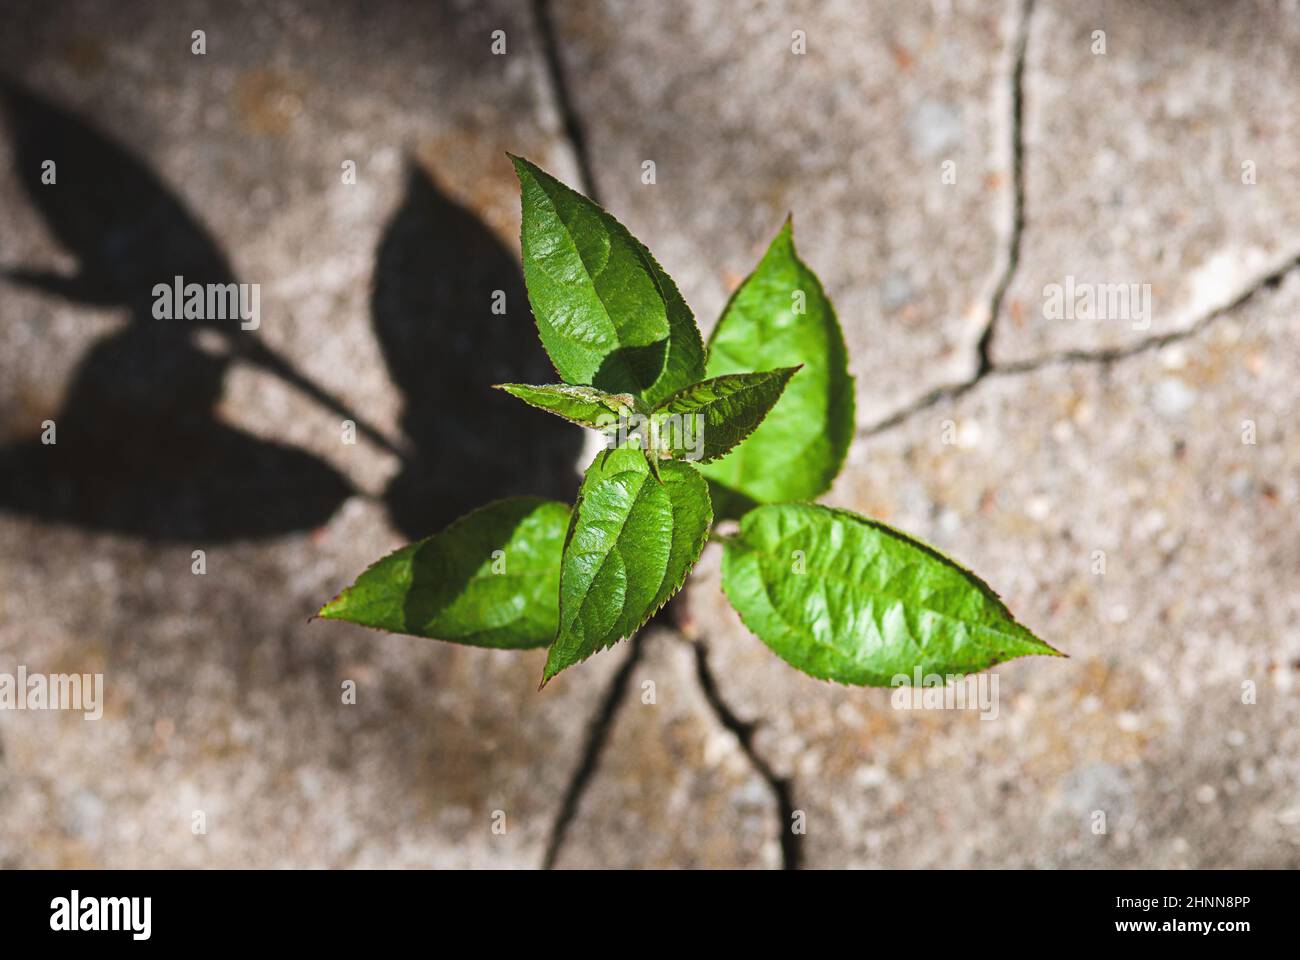 Plant sprouted in stone crack, vitality, survivability, resilience, rebirth, peace and new life concept Stock Photo